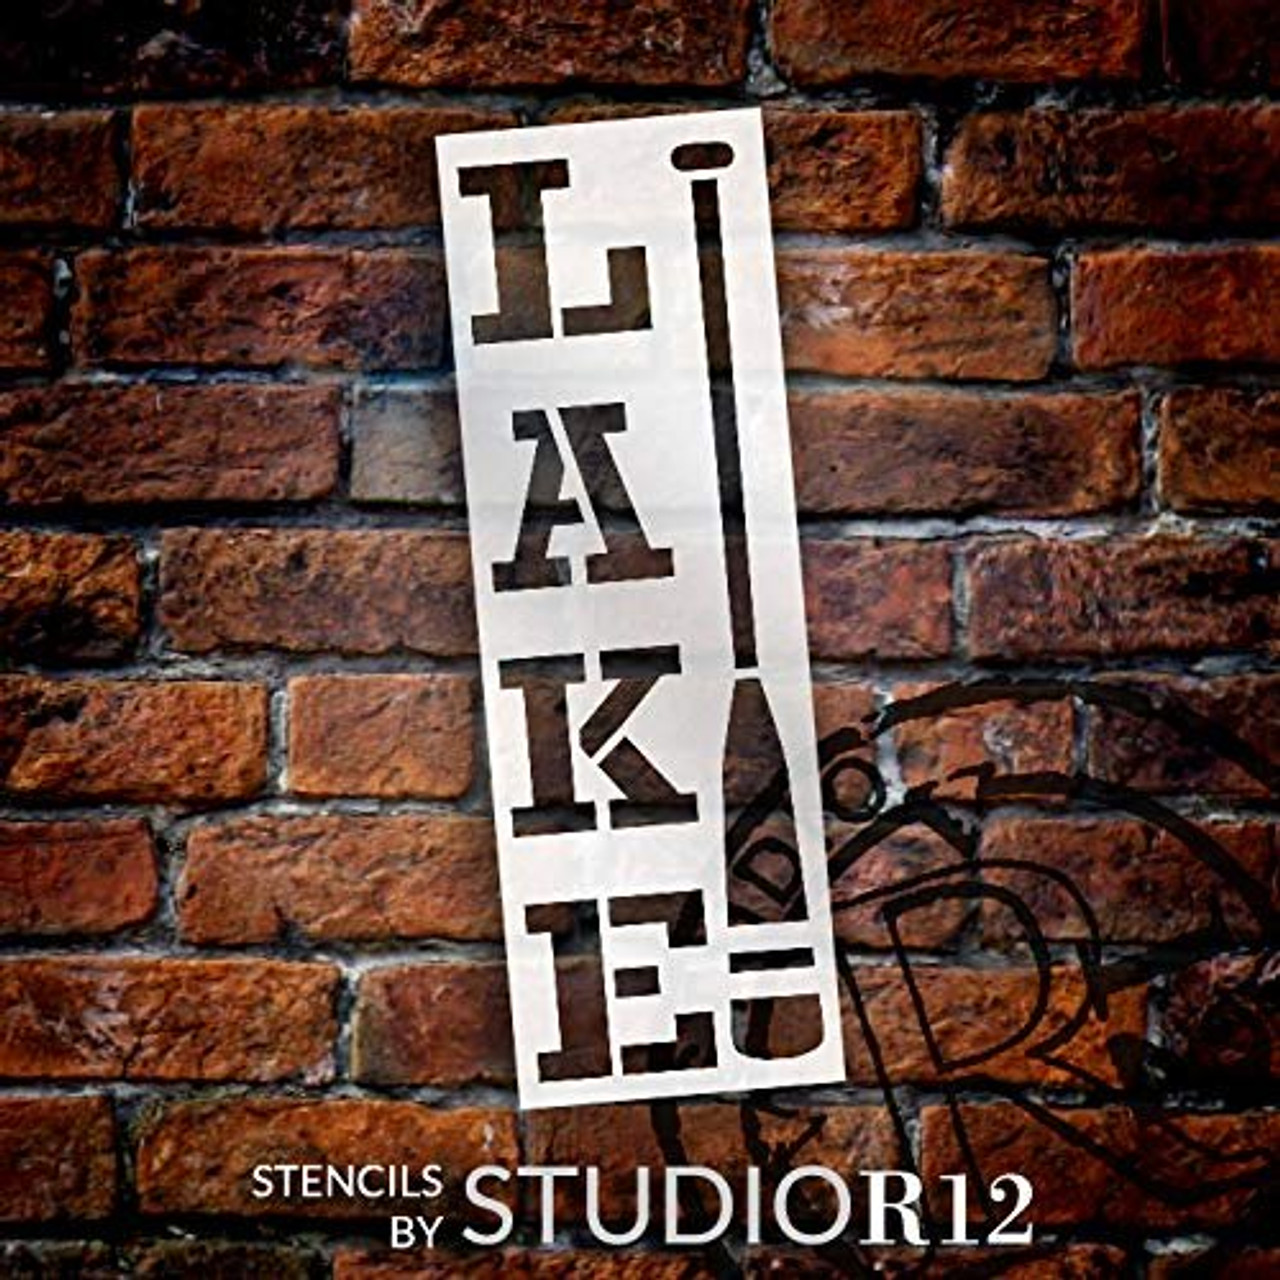 Vertical Lake Stencil with Oar by StudioR12 | DIY Country Rustic Home & Cabin Decor | Camping Adventure Word Art | Craft & Paint Wood Sign | Reusable Mylar Template | Select Size